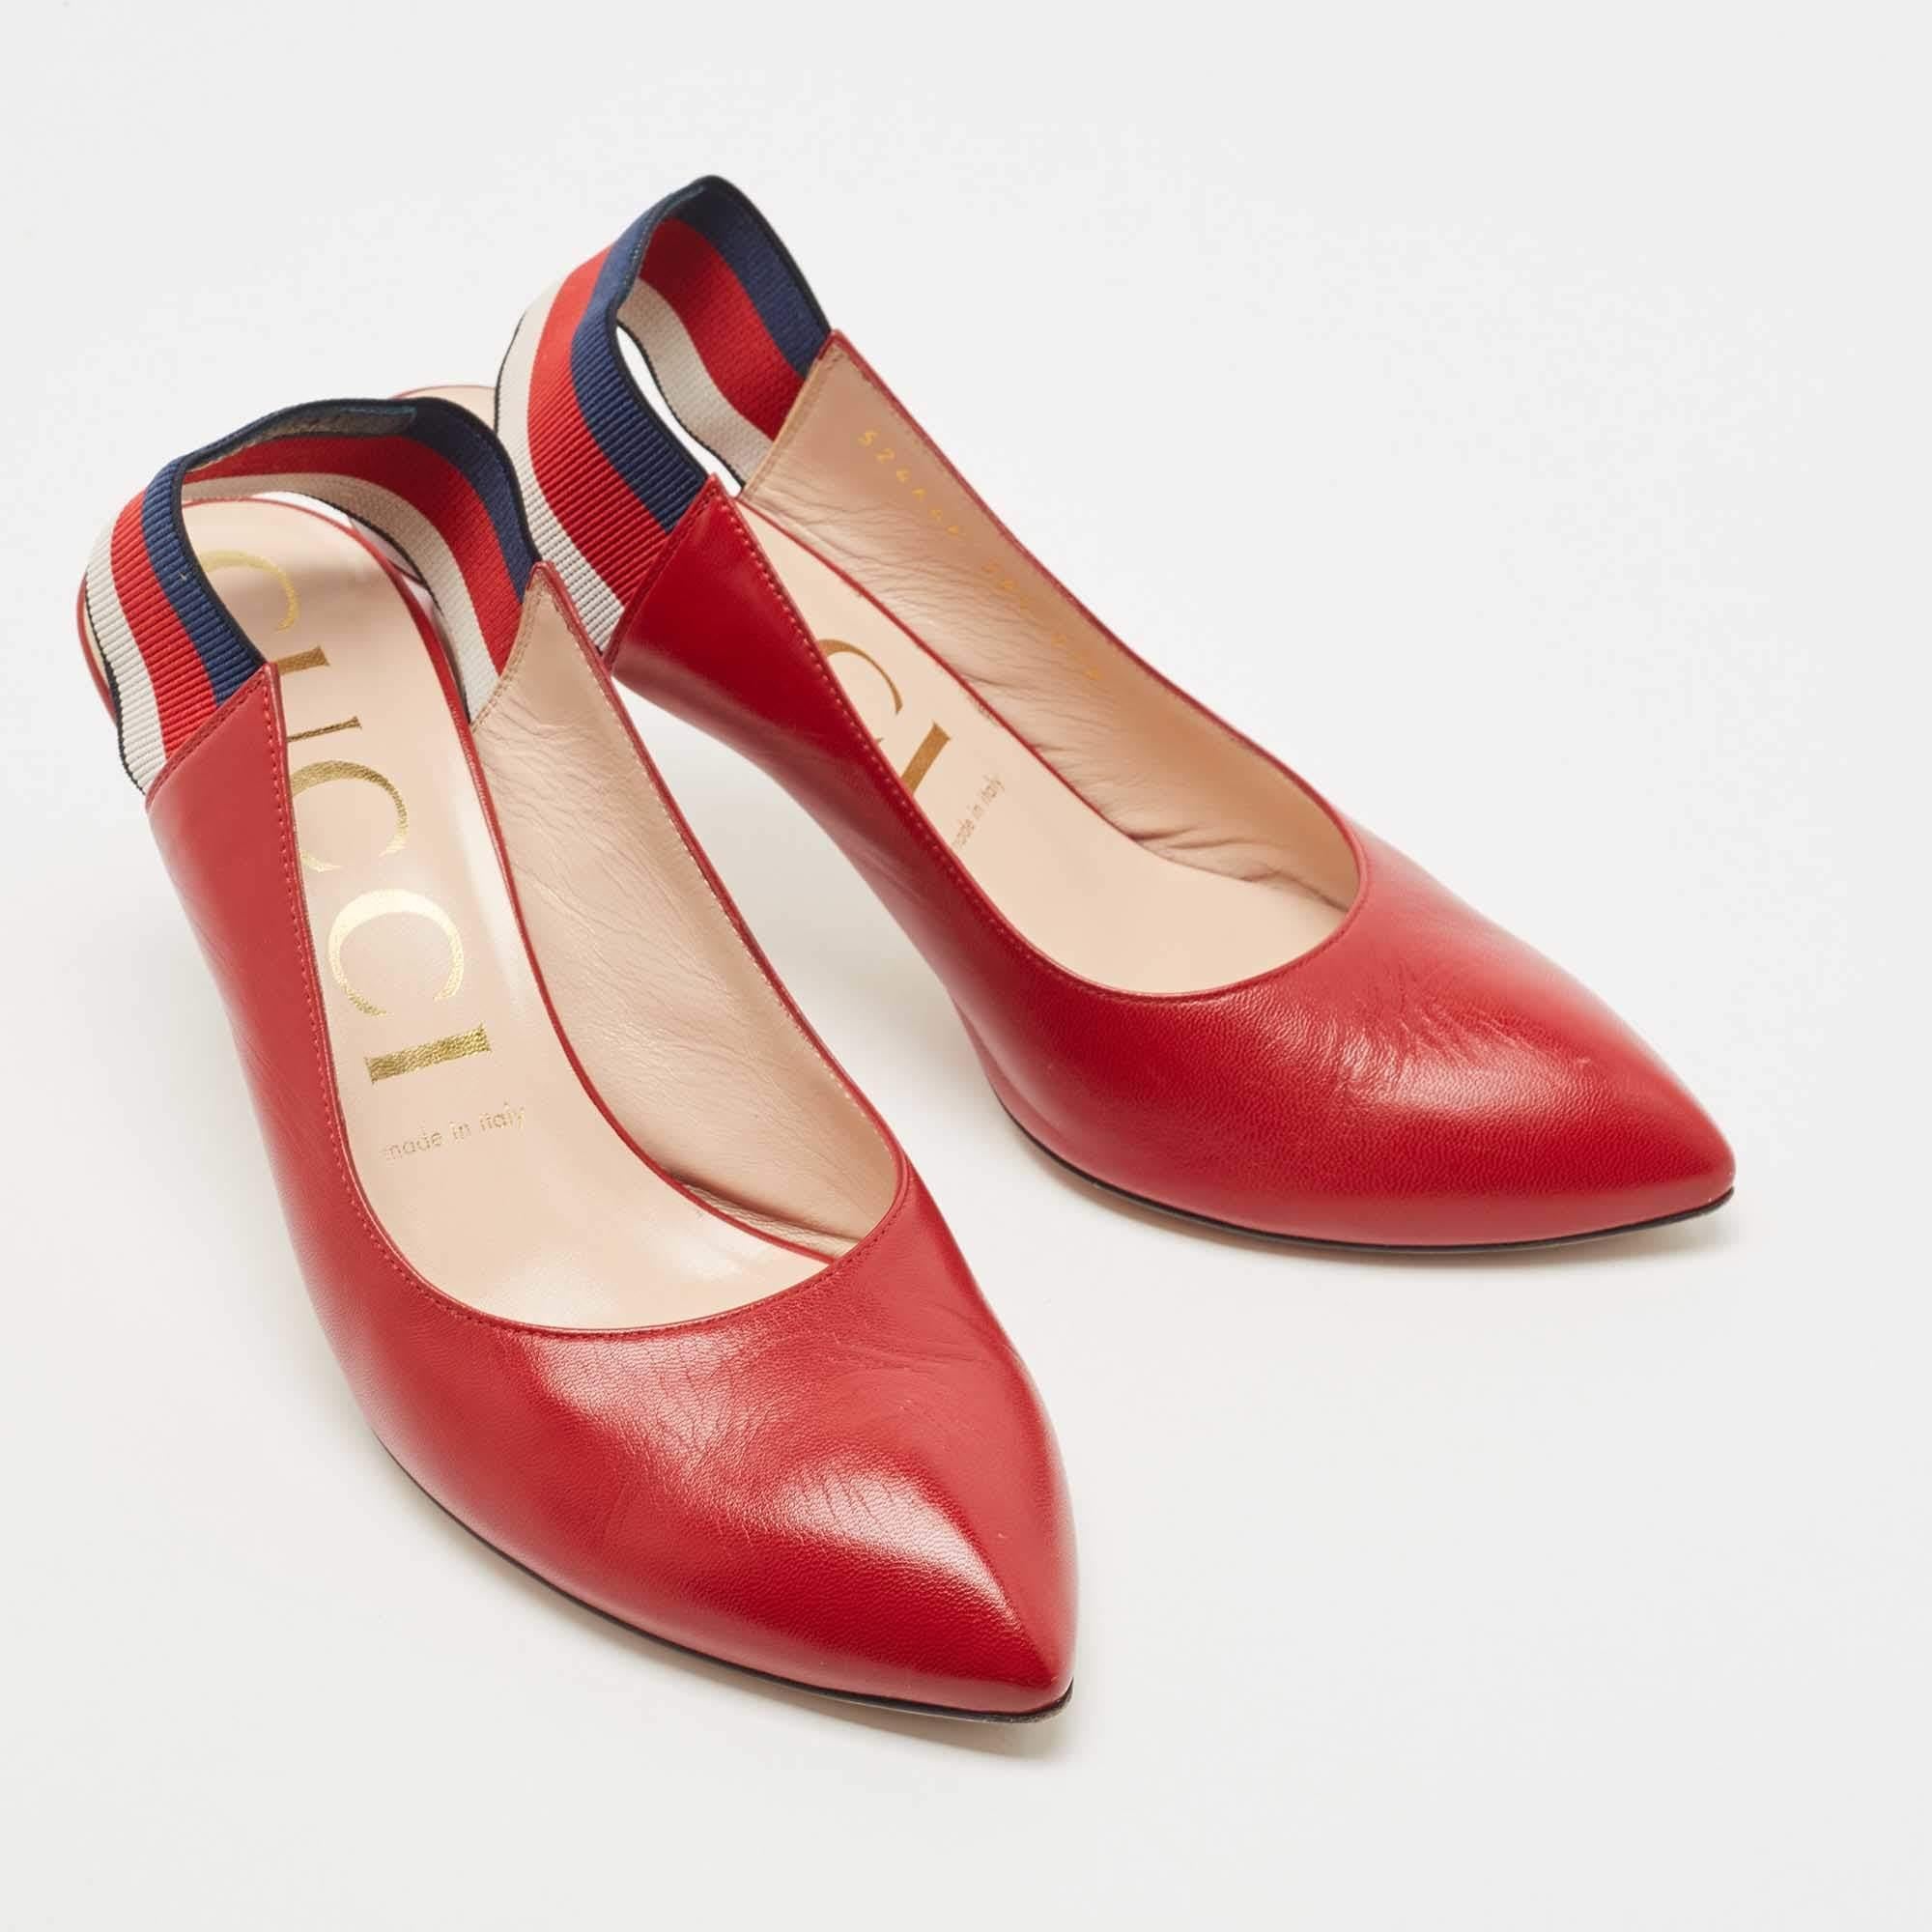 Gucci Red Leather Sylvie Web Slingback Pumps Size 38.5 2